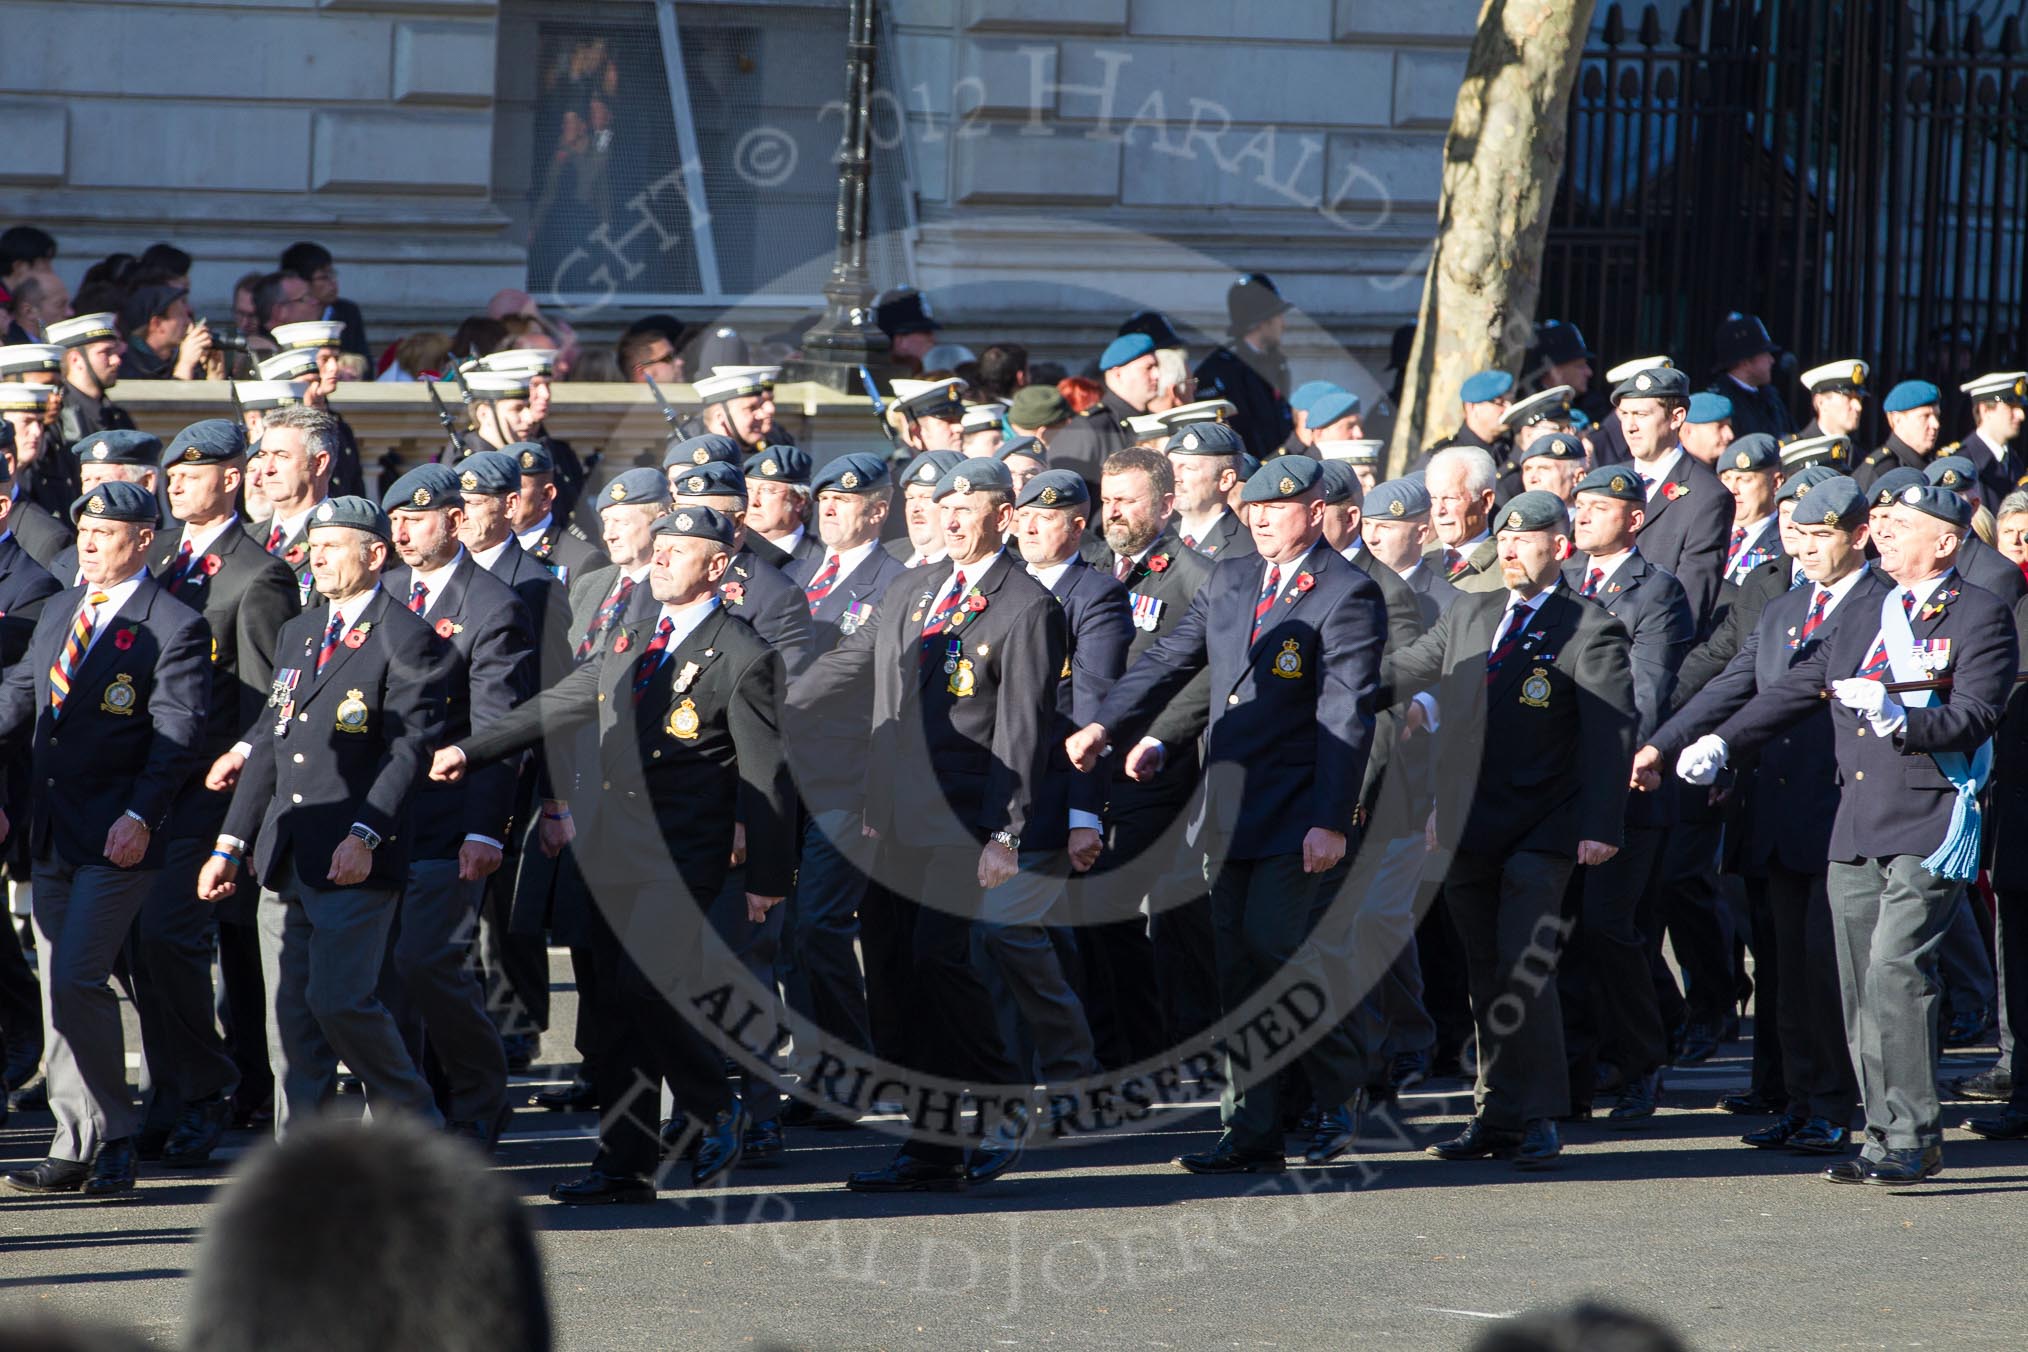 Remembrance Sunday 2012 Cenotaph March Past: Group C2 - Royal Air Force Regiment Association..
Whitehall, Cenotaph,
London SW1,

United Kingdom,
on 11 November 2012 at 12:00, image #1060